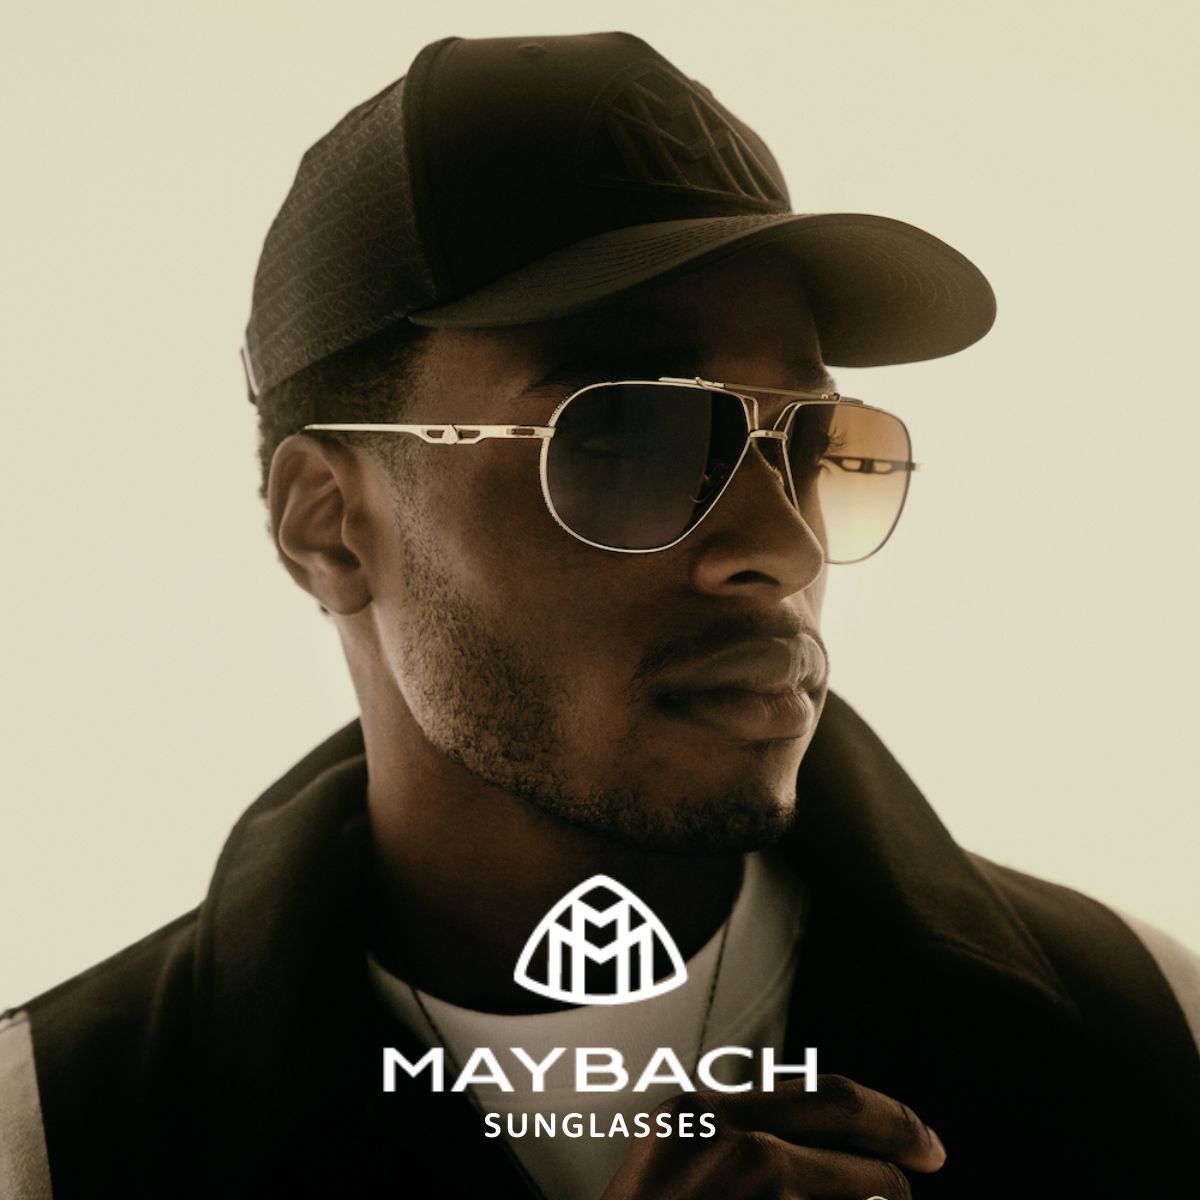 "Maybach sunglasses: stylish options for men and women at Optorium."